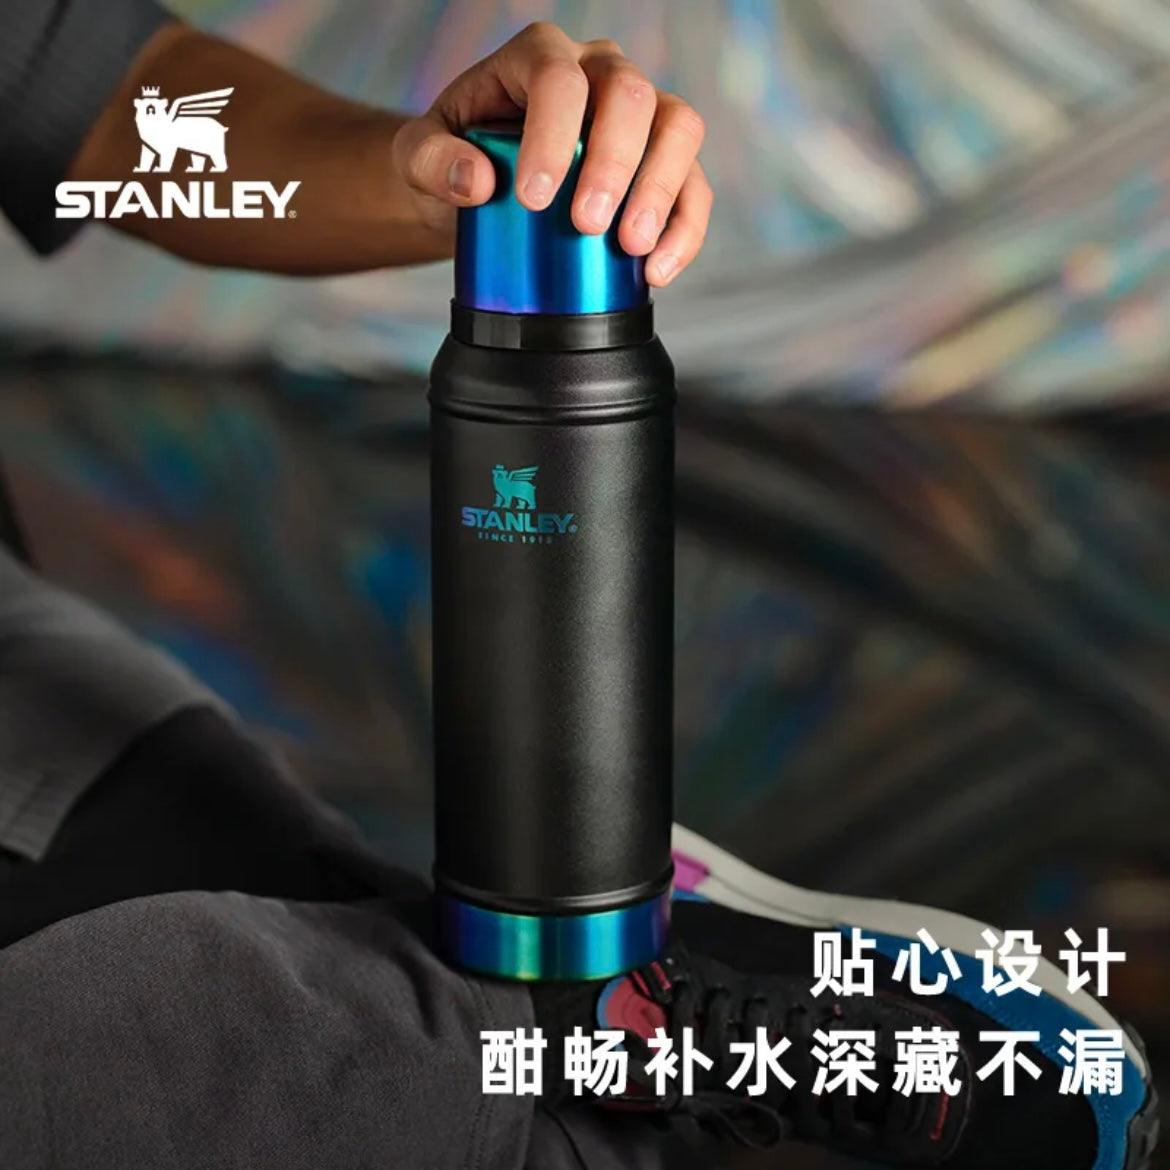 China Stanley Dazzle Black Stainless Steel Tumbler